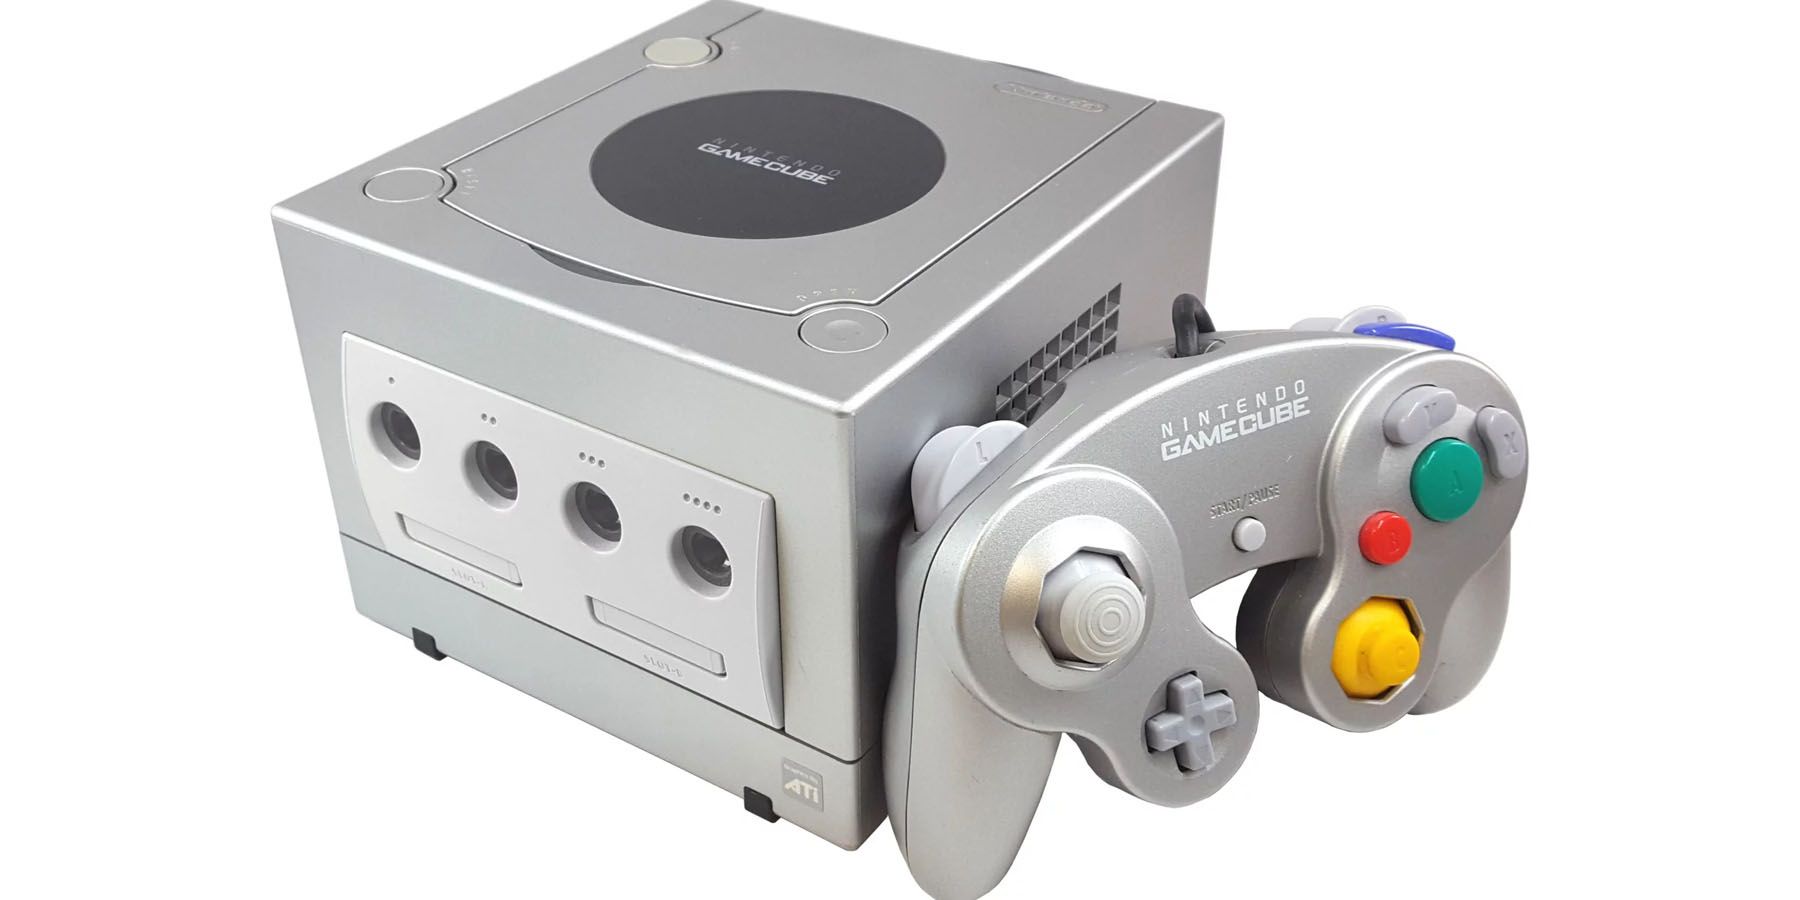 An image of a silver Nintendo GameCube and a controller against a white background.